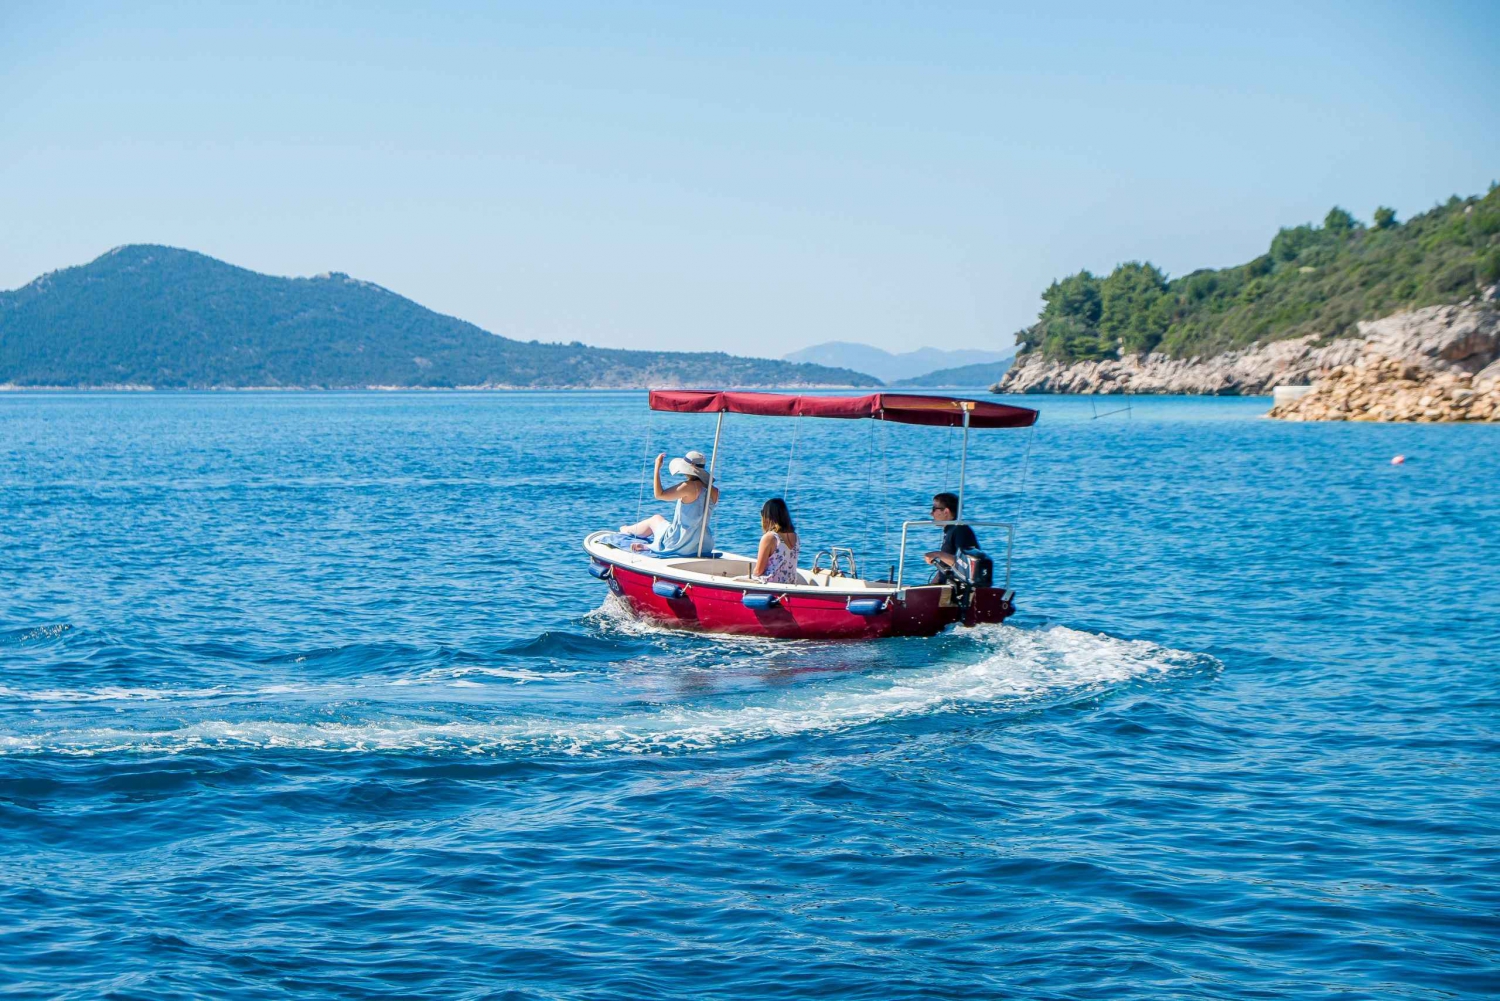 Rent a small boat without skipper - explore the islands